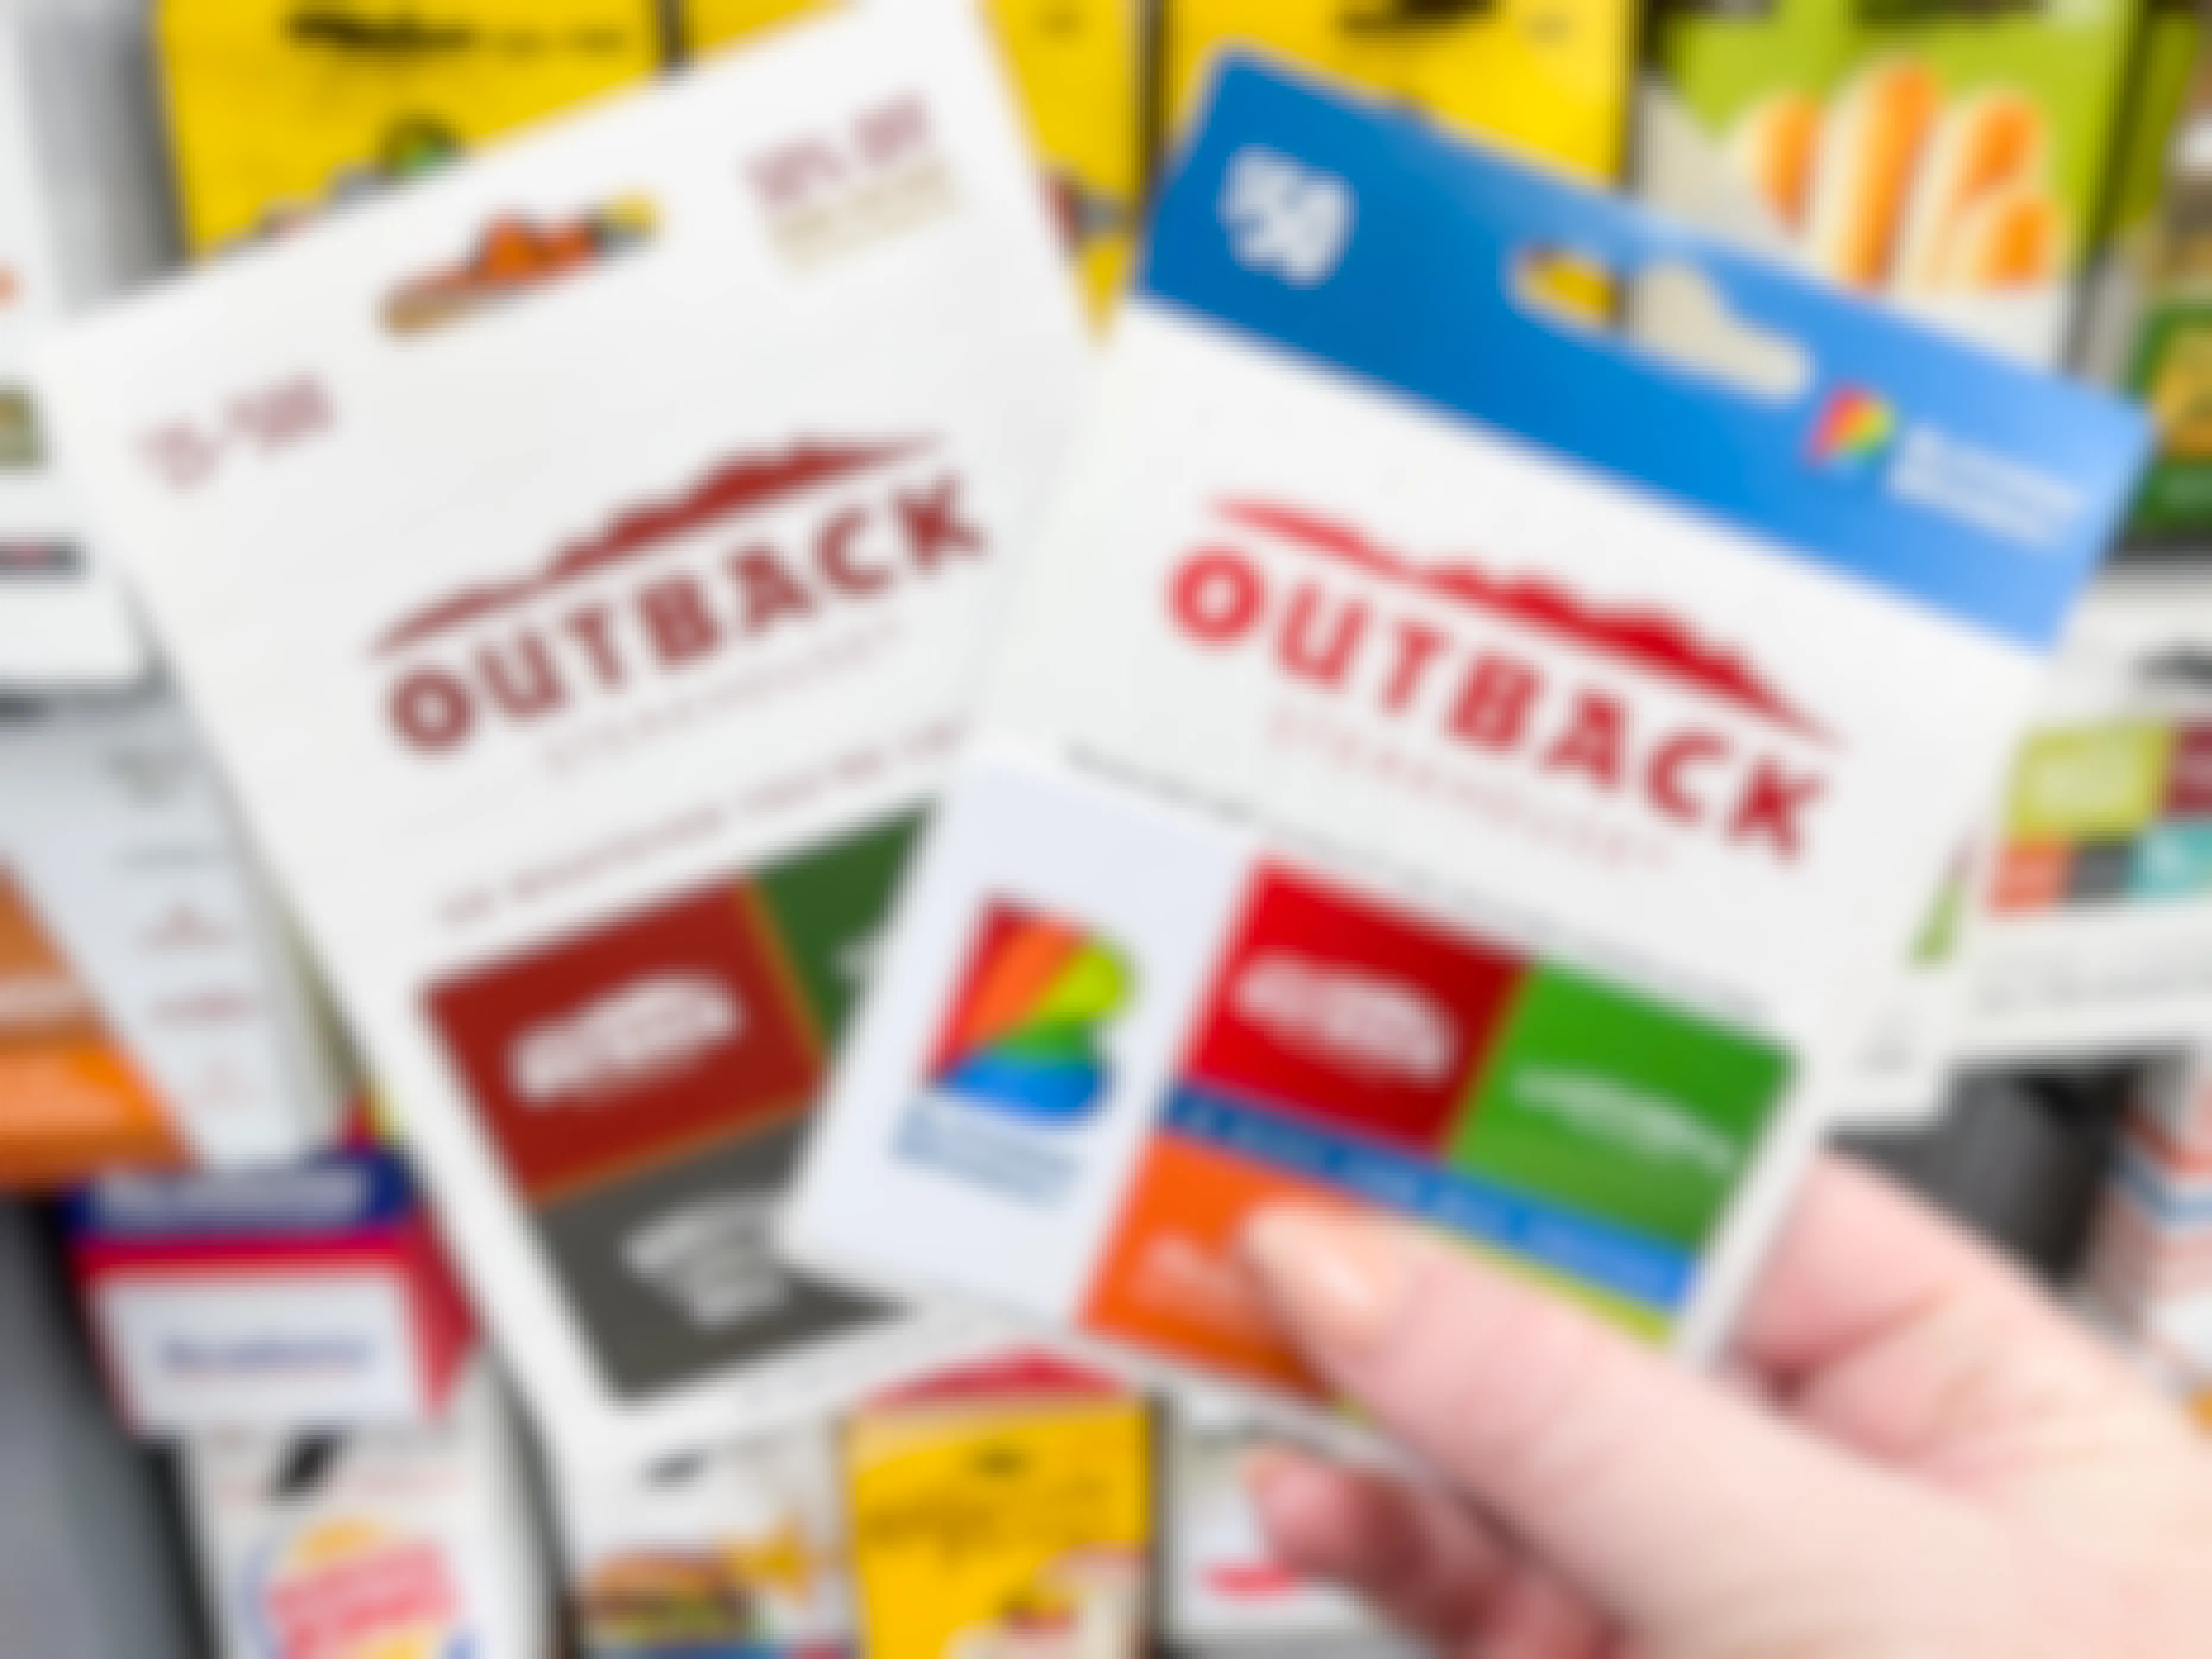 A person's hand holding two Outback Steakhouse gift cards in front of a display of gift cards.